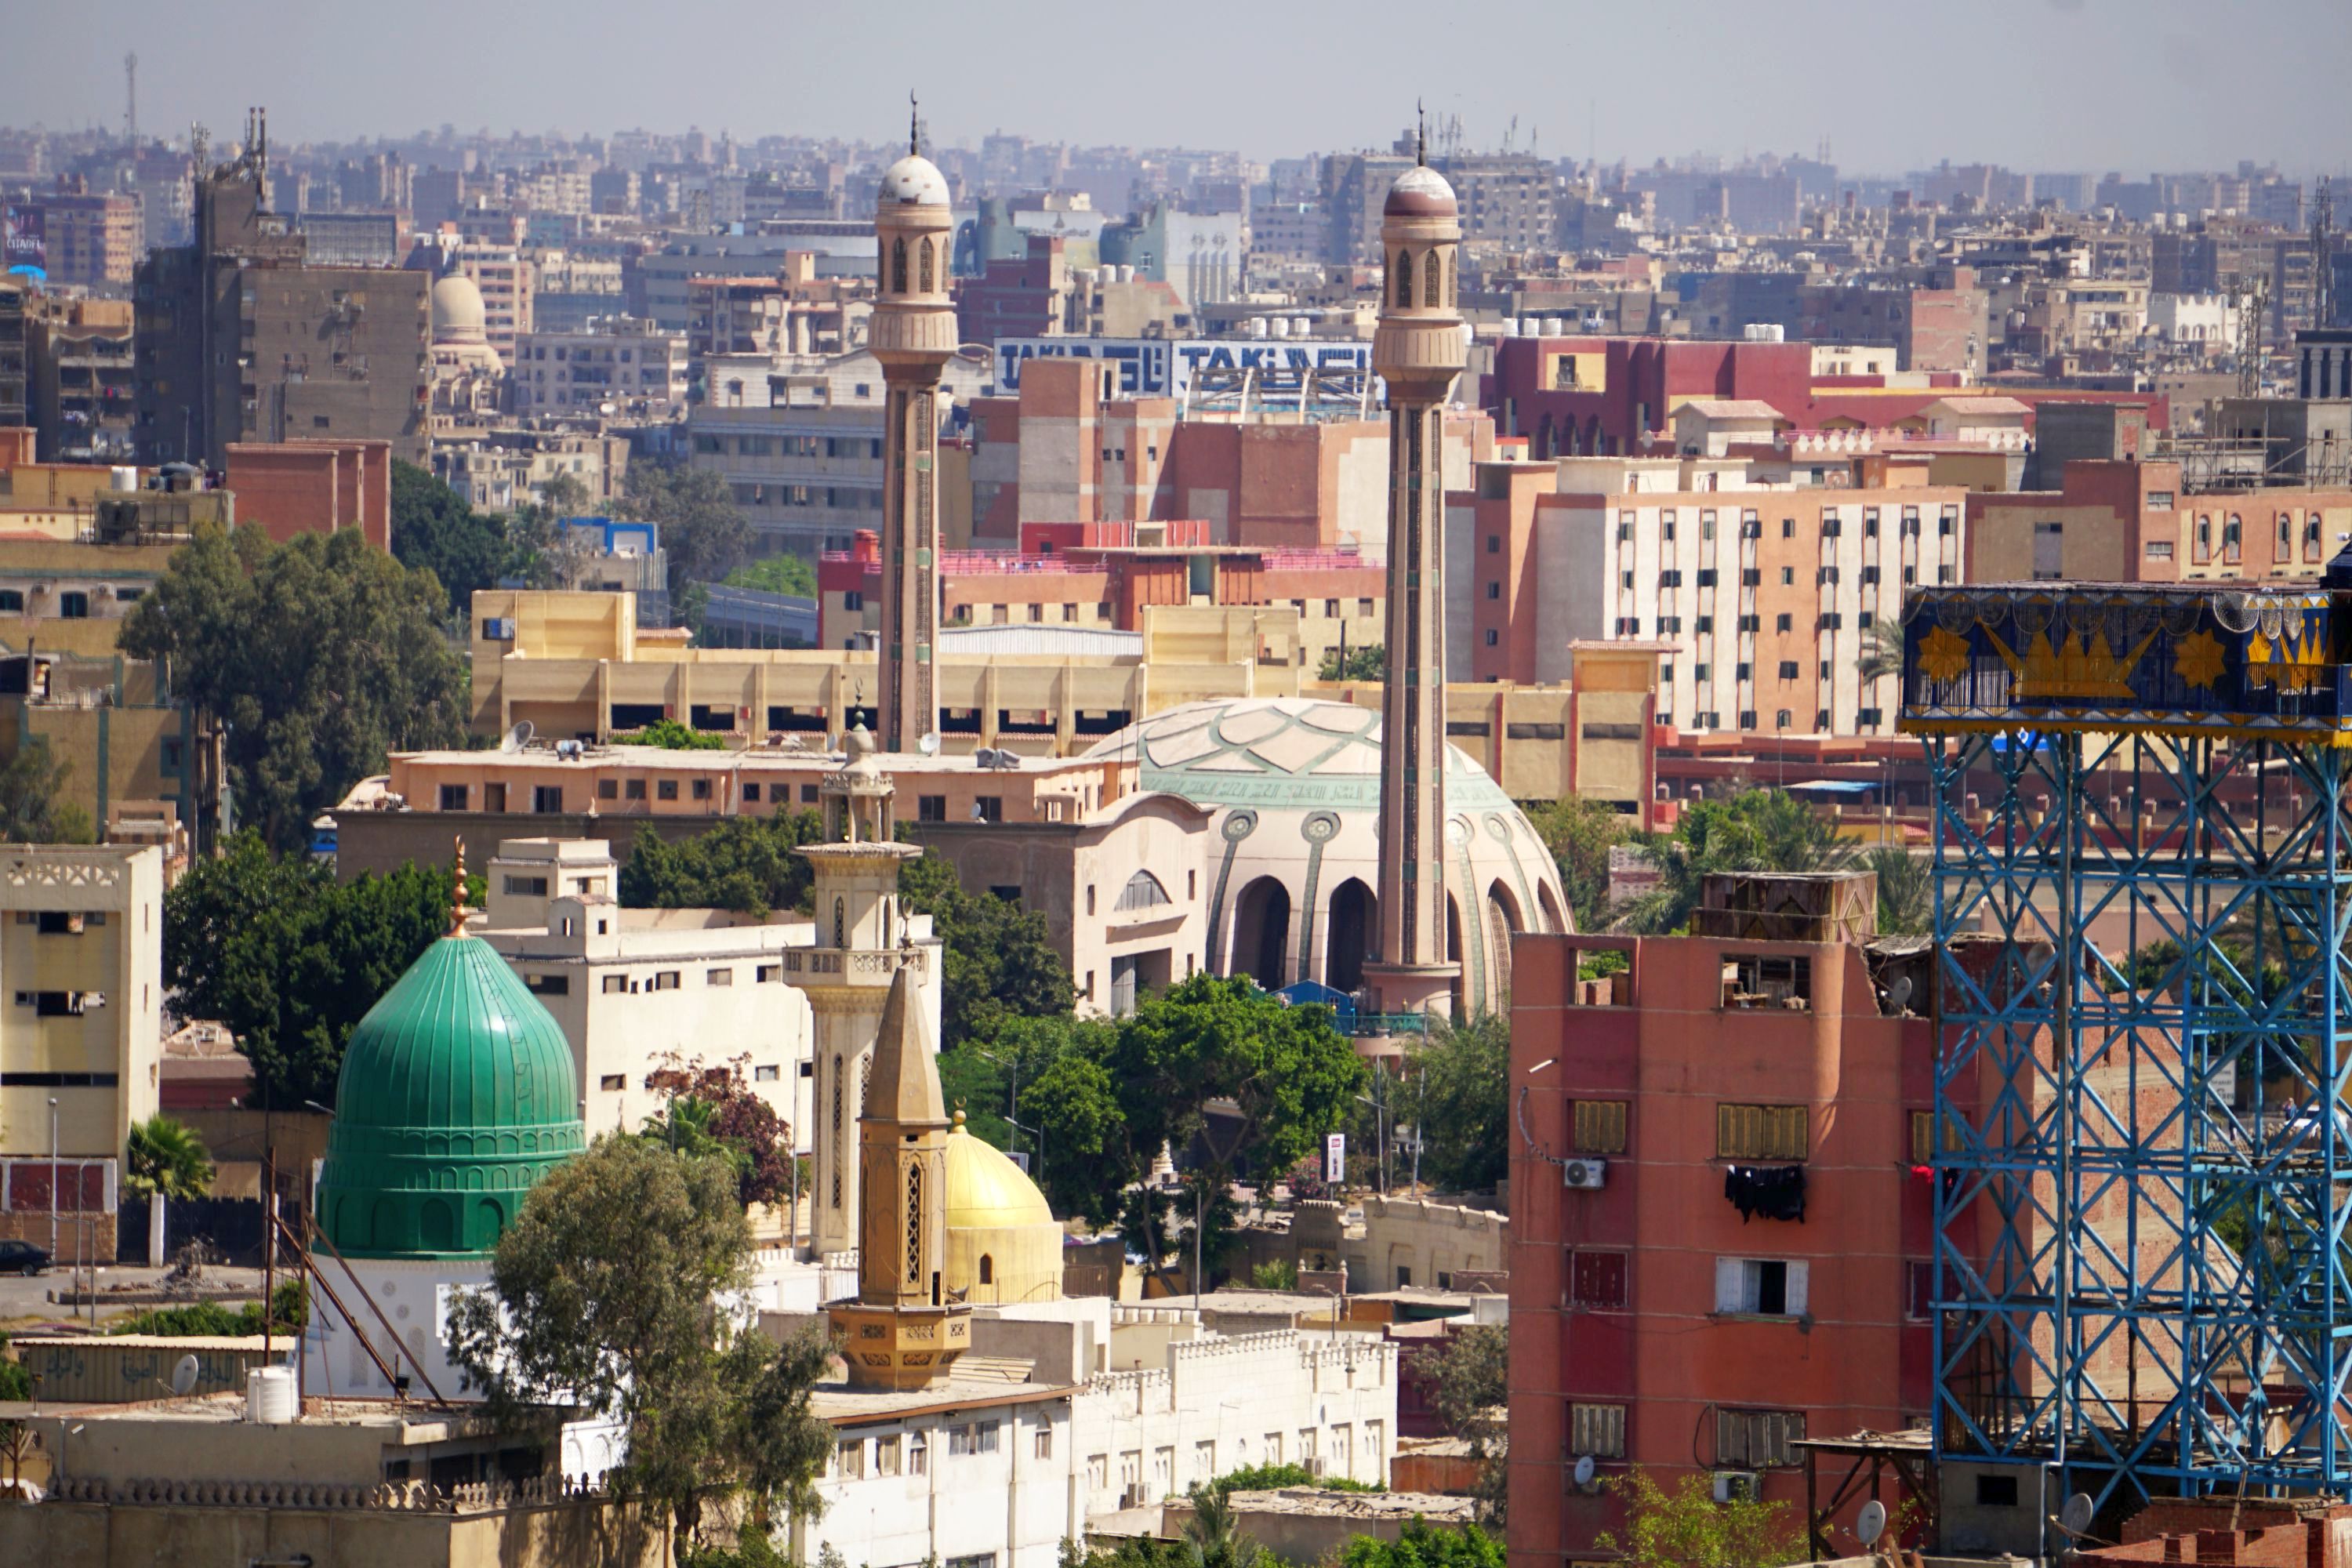 Cairo – mosques, markets and the Citadel